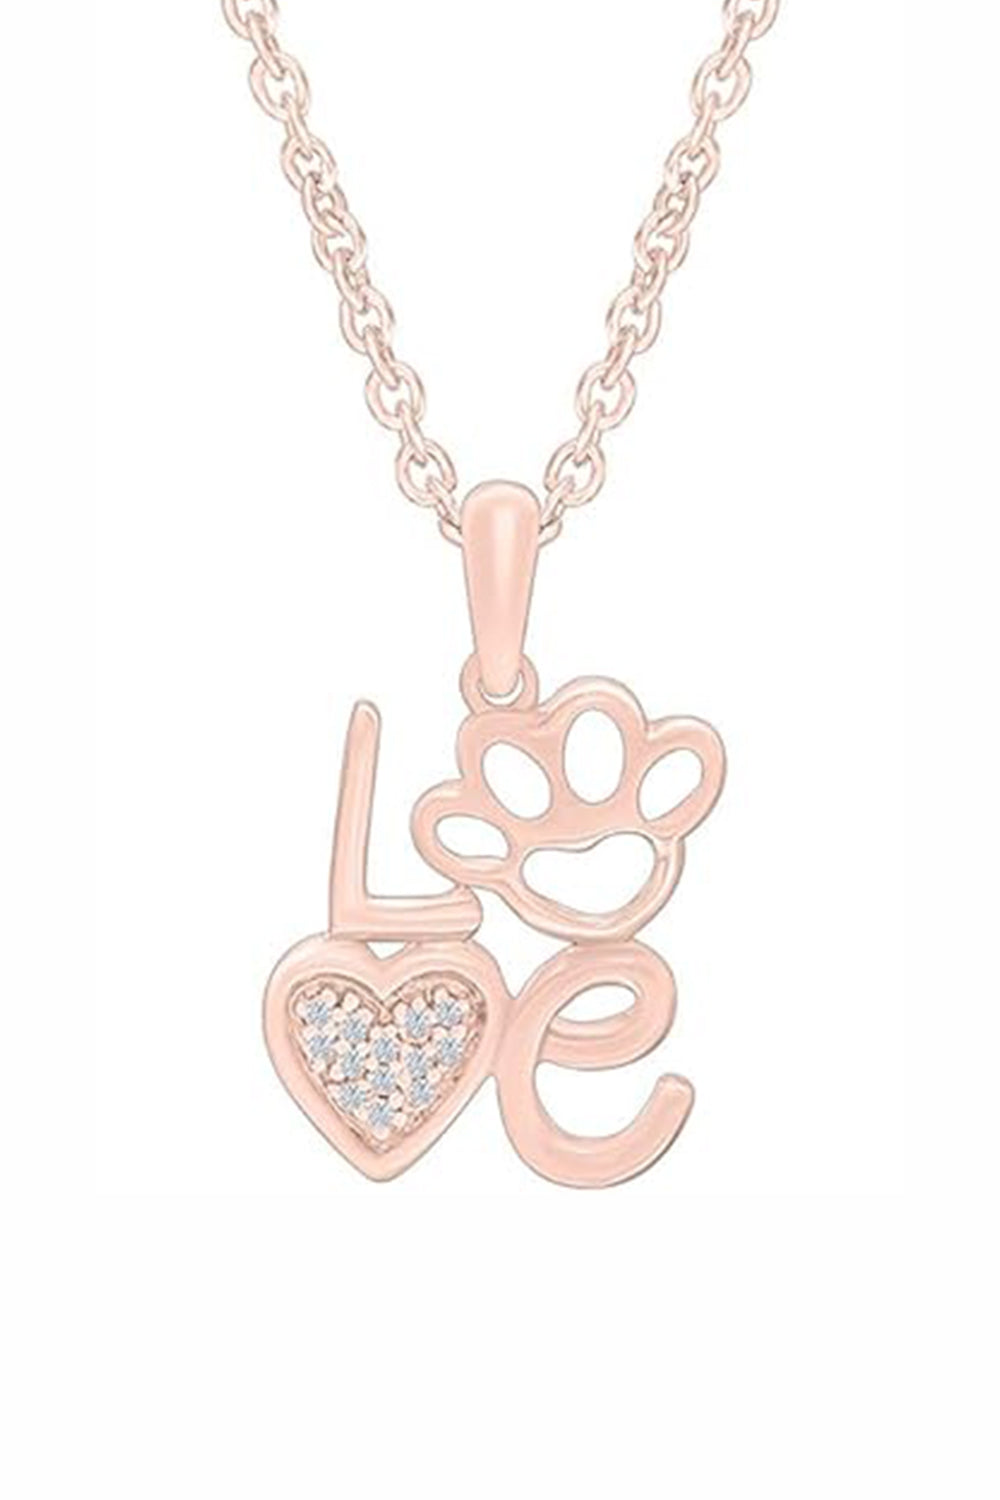 Rose Gold Color Love Paw Print Pendant Necklace, Fashion Jewellery